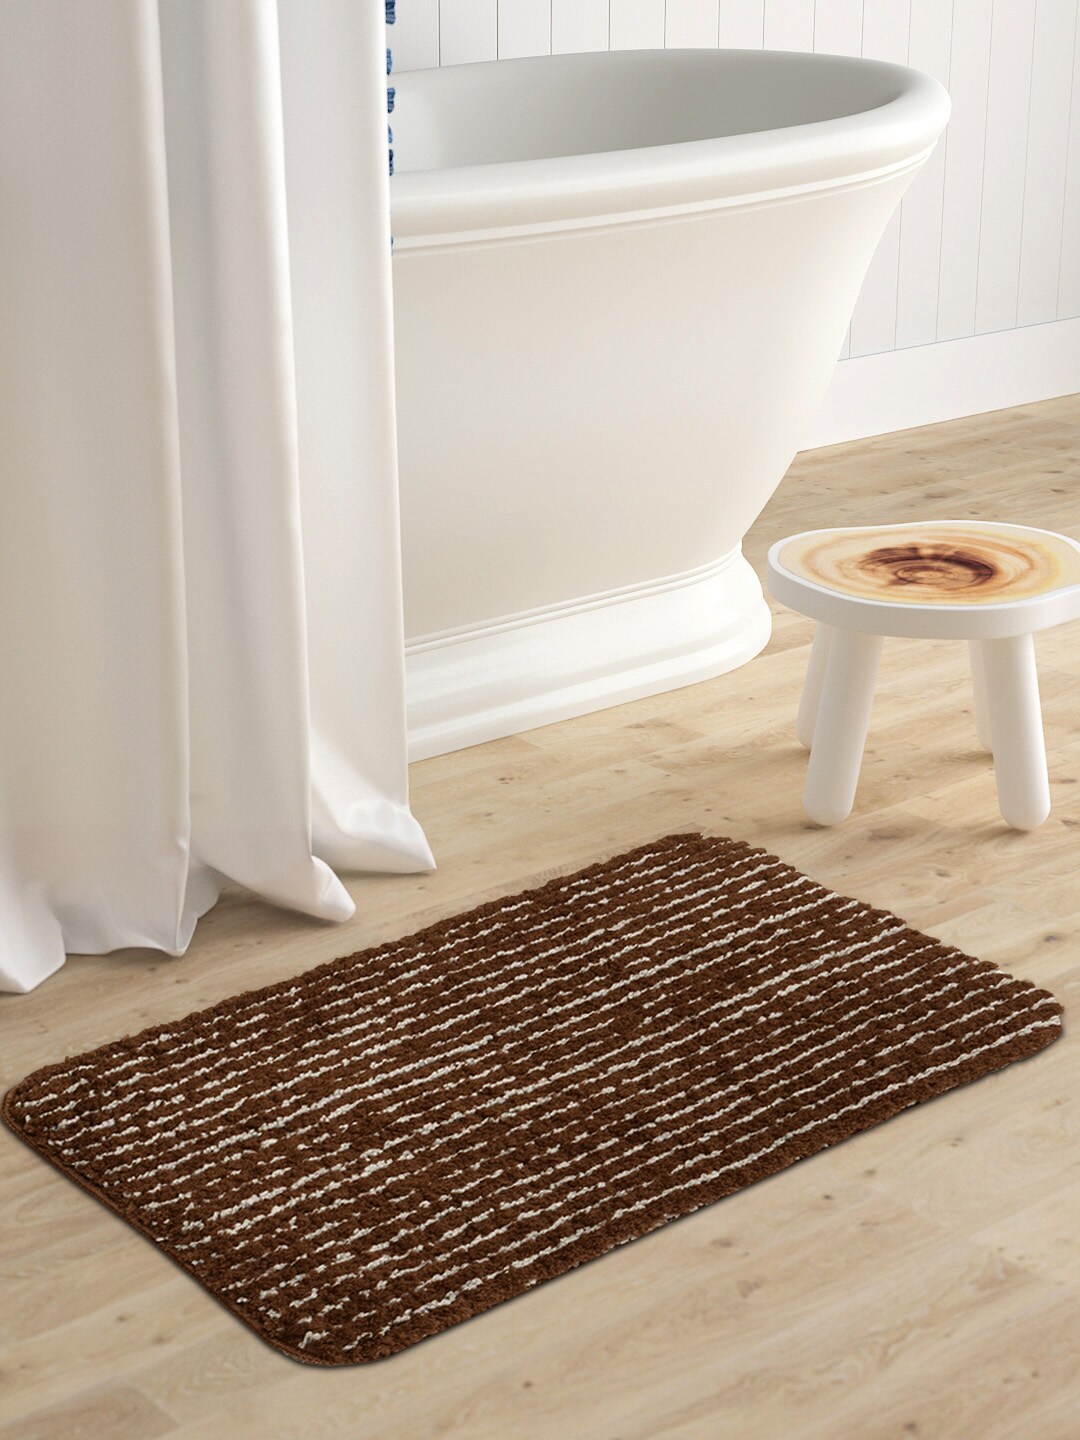 Saral Home Brown & Grey Striped Furry Soft Anti-Skid Bathmat Price in India